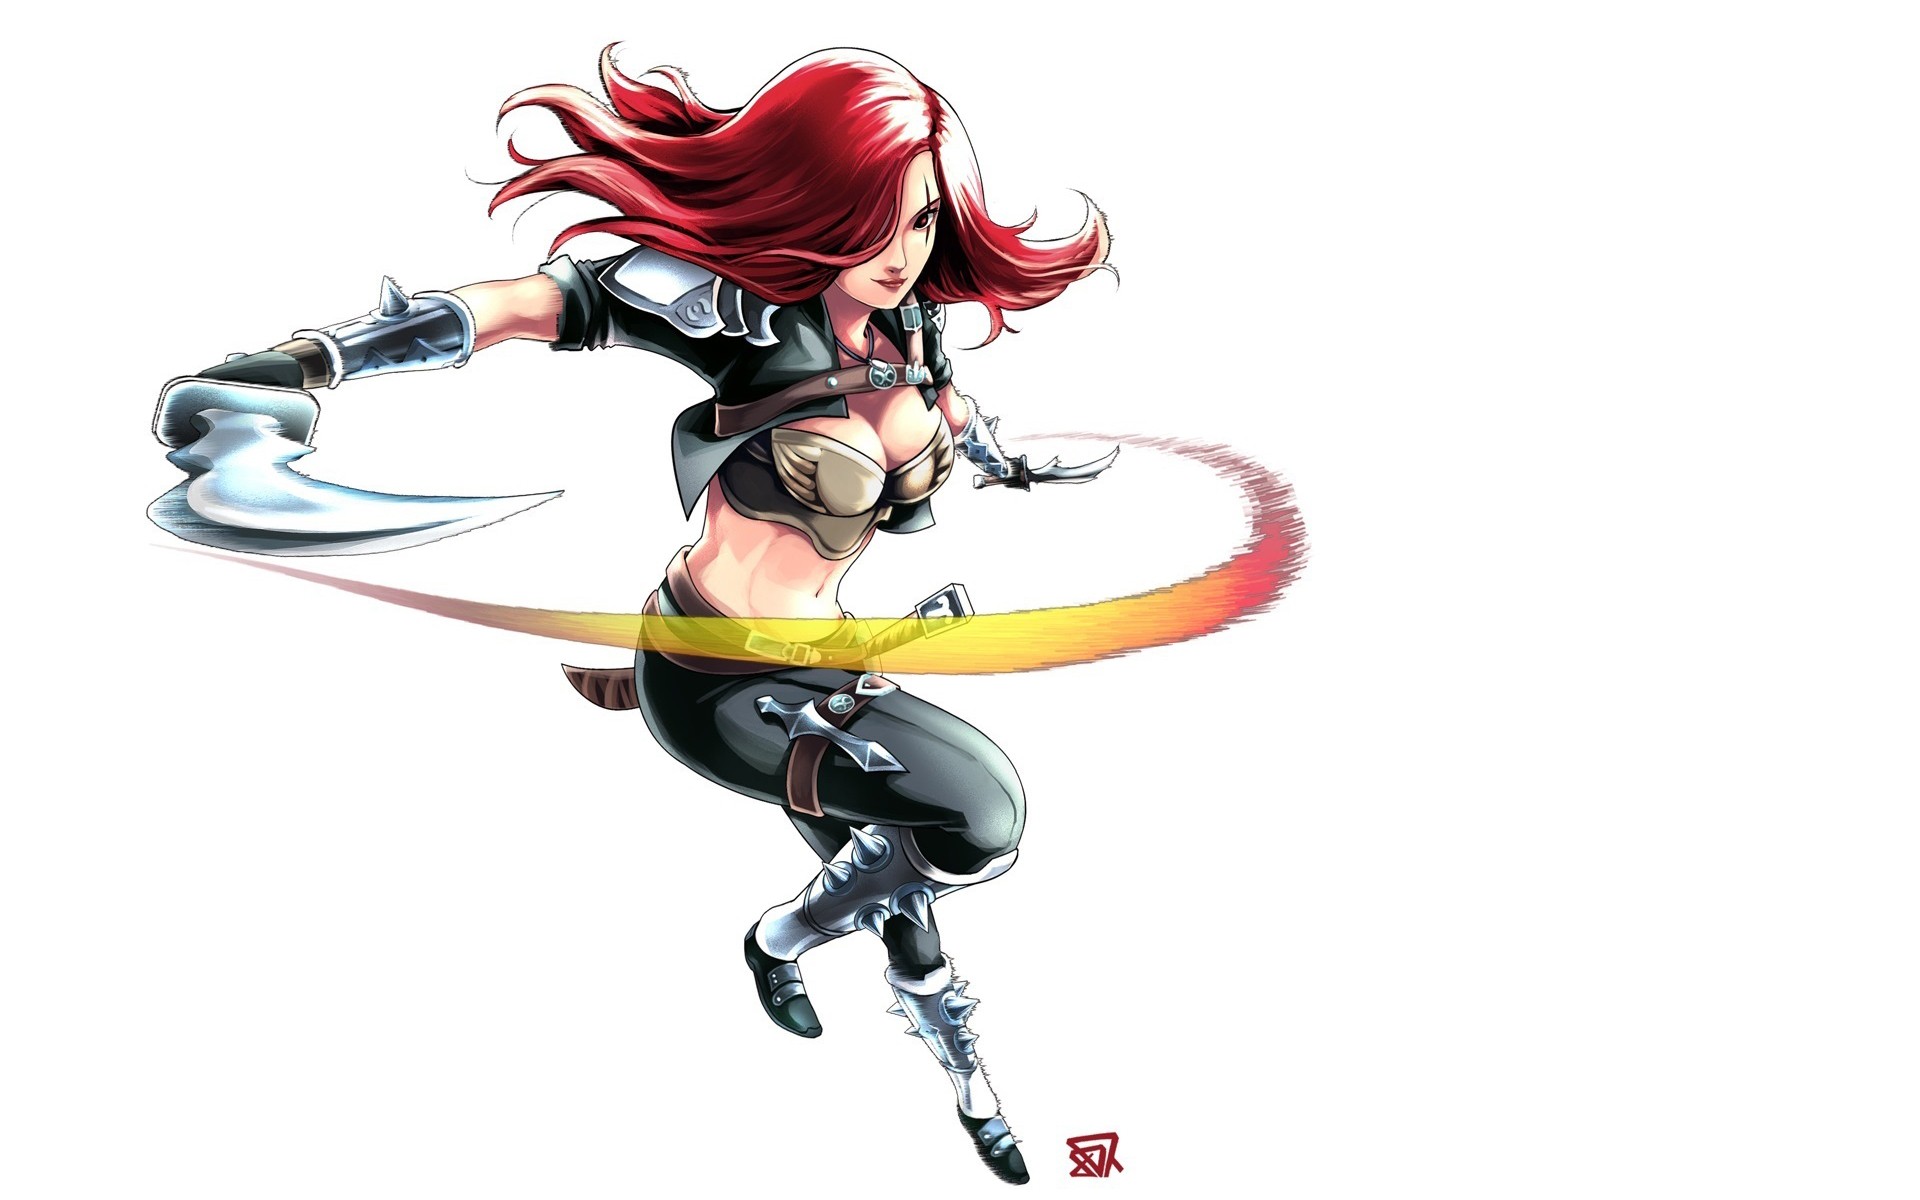 Anime 1920x1200 League of Legends video games Katarina (League of Legends) redhead long hair boobs cleavage belly women with swords sword weapon simple background white background PC gaming video game art video game girls fantasy art fantasy girl